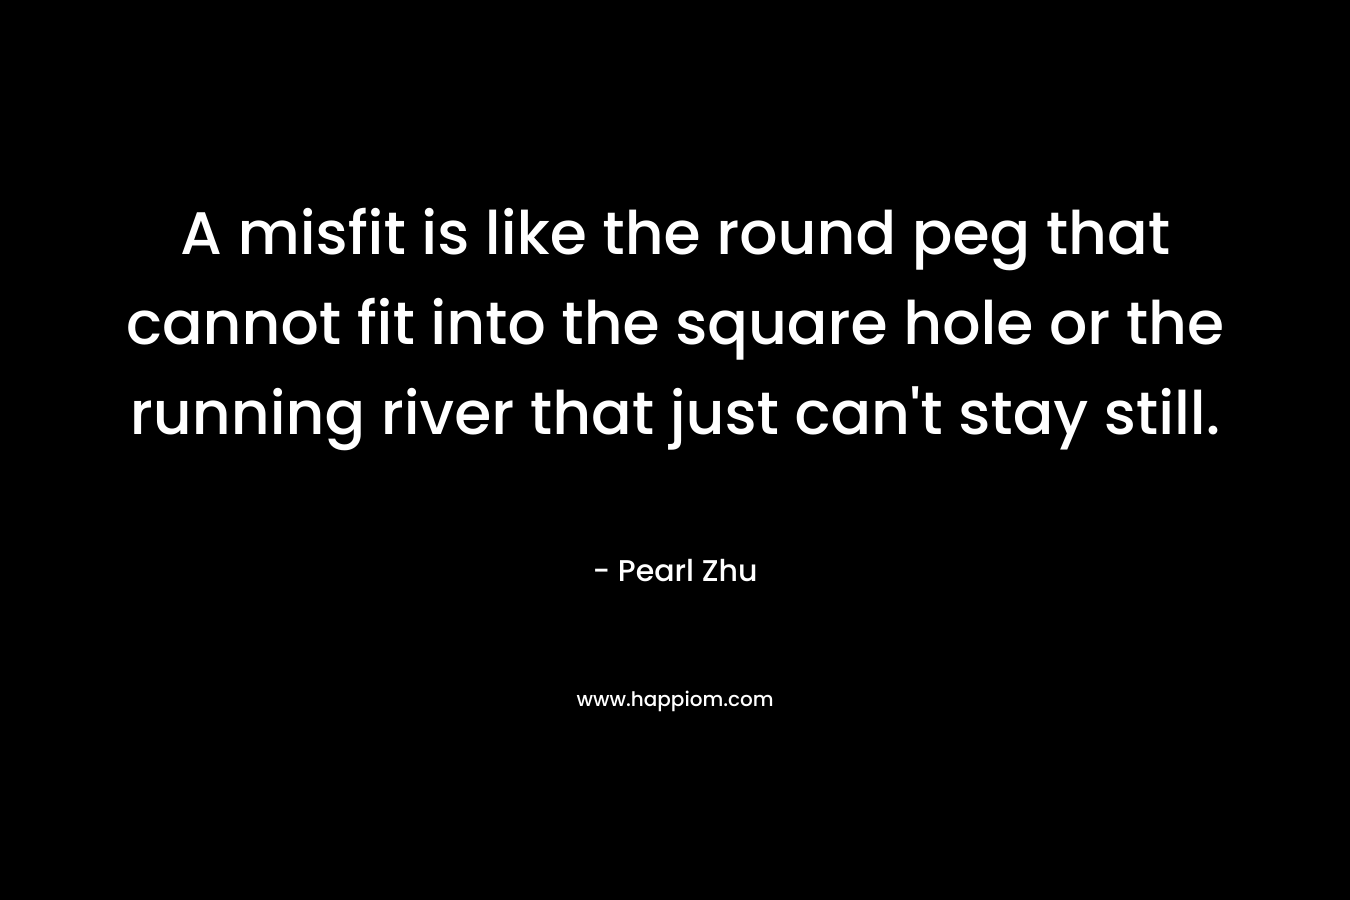 A misfit is like the round peg that cannot fit into the square hole or the running river that just can't stay still.